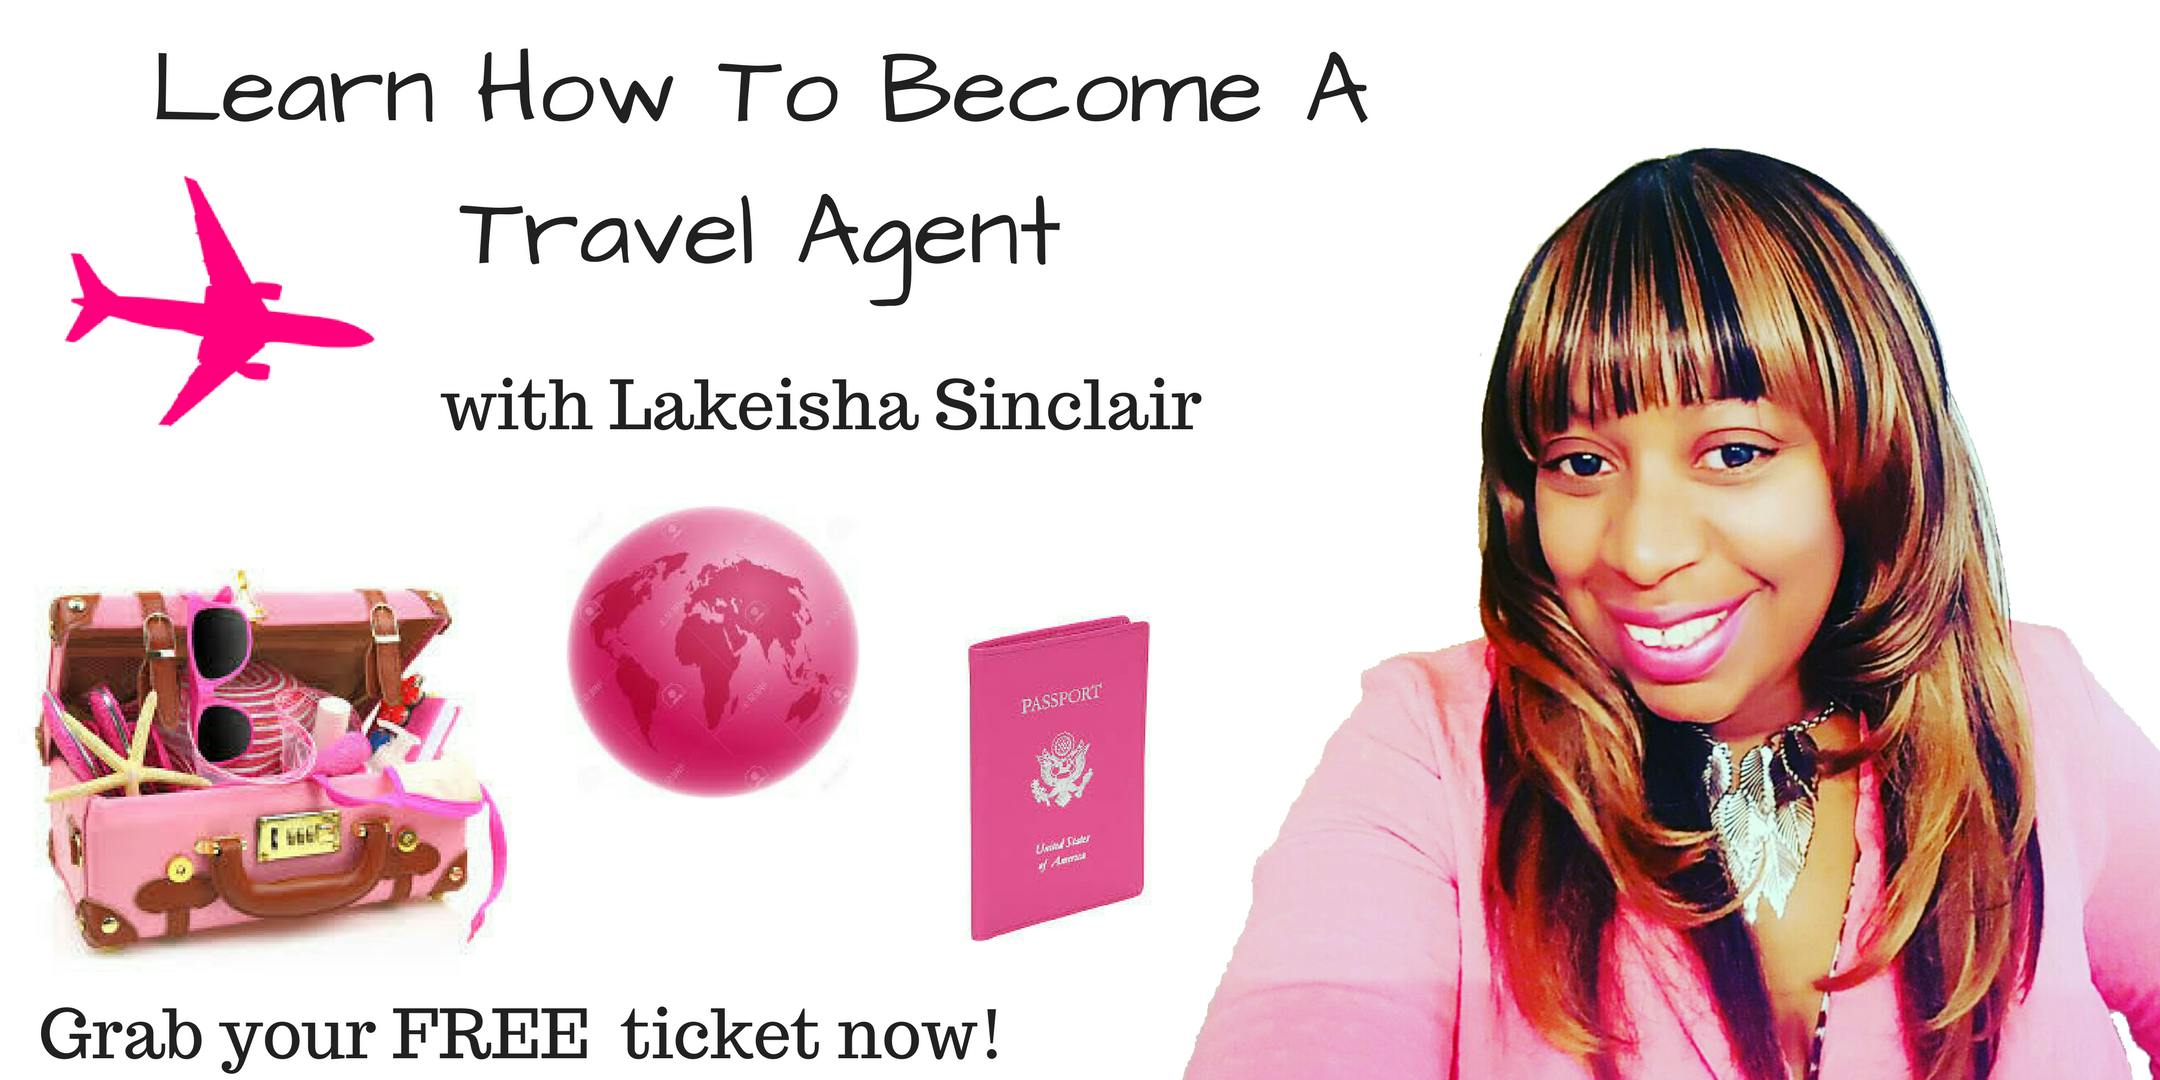 Learn How To Become A Travel Agent